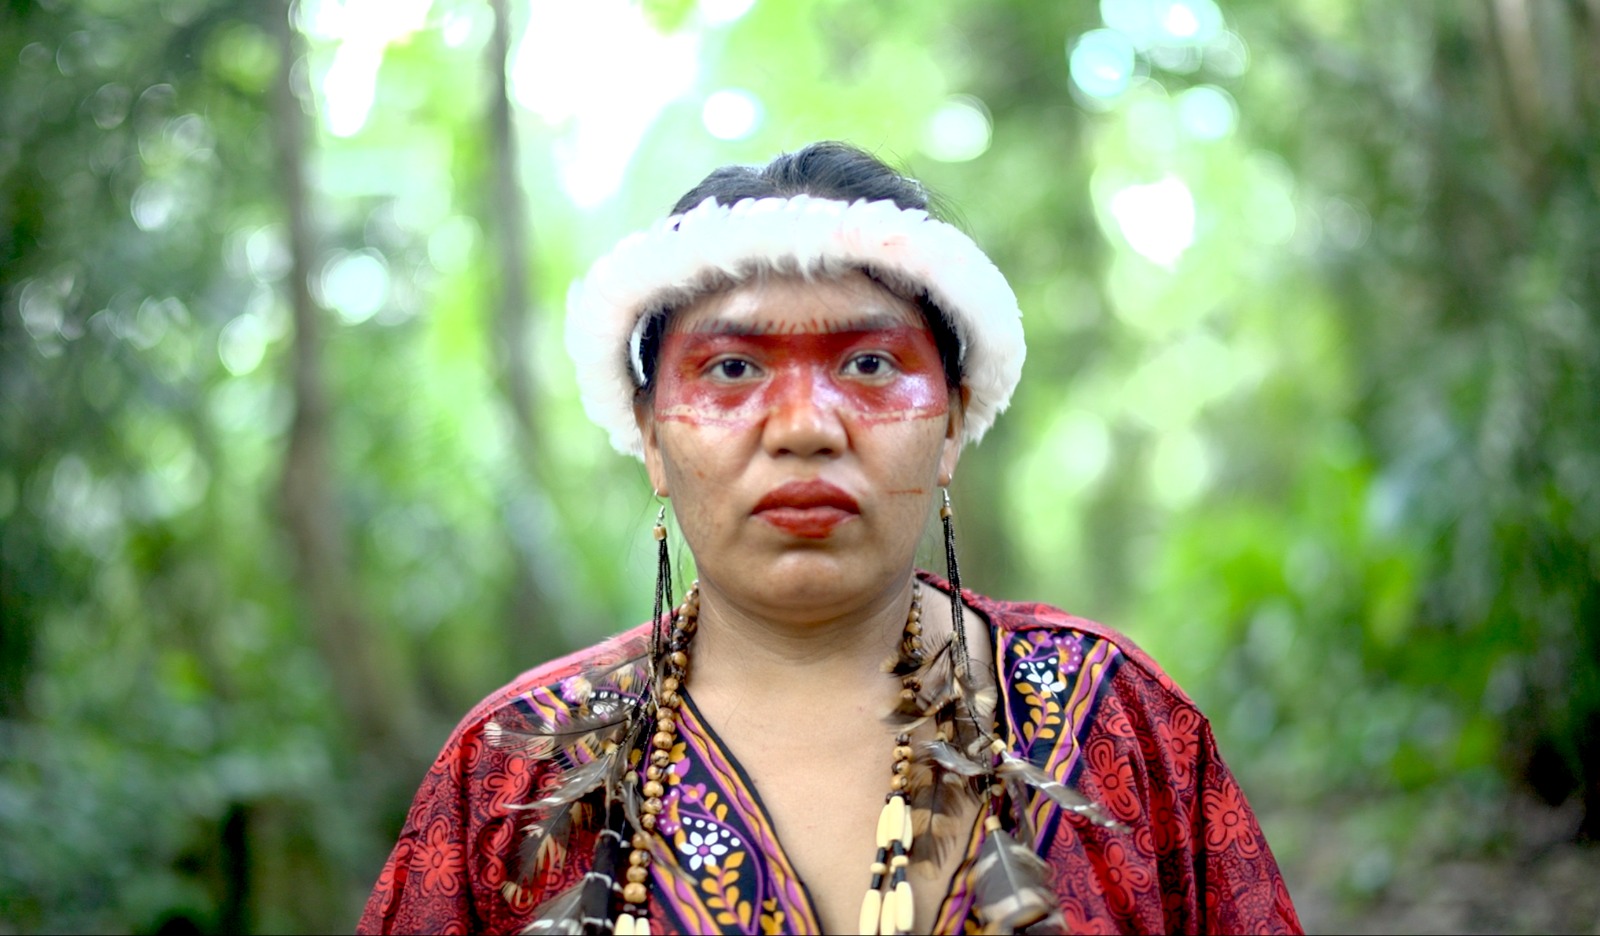 Woman with red face paint across her face, feathered earrings and a red top stands infront of a blurred forest background